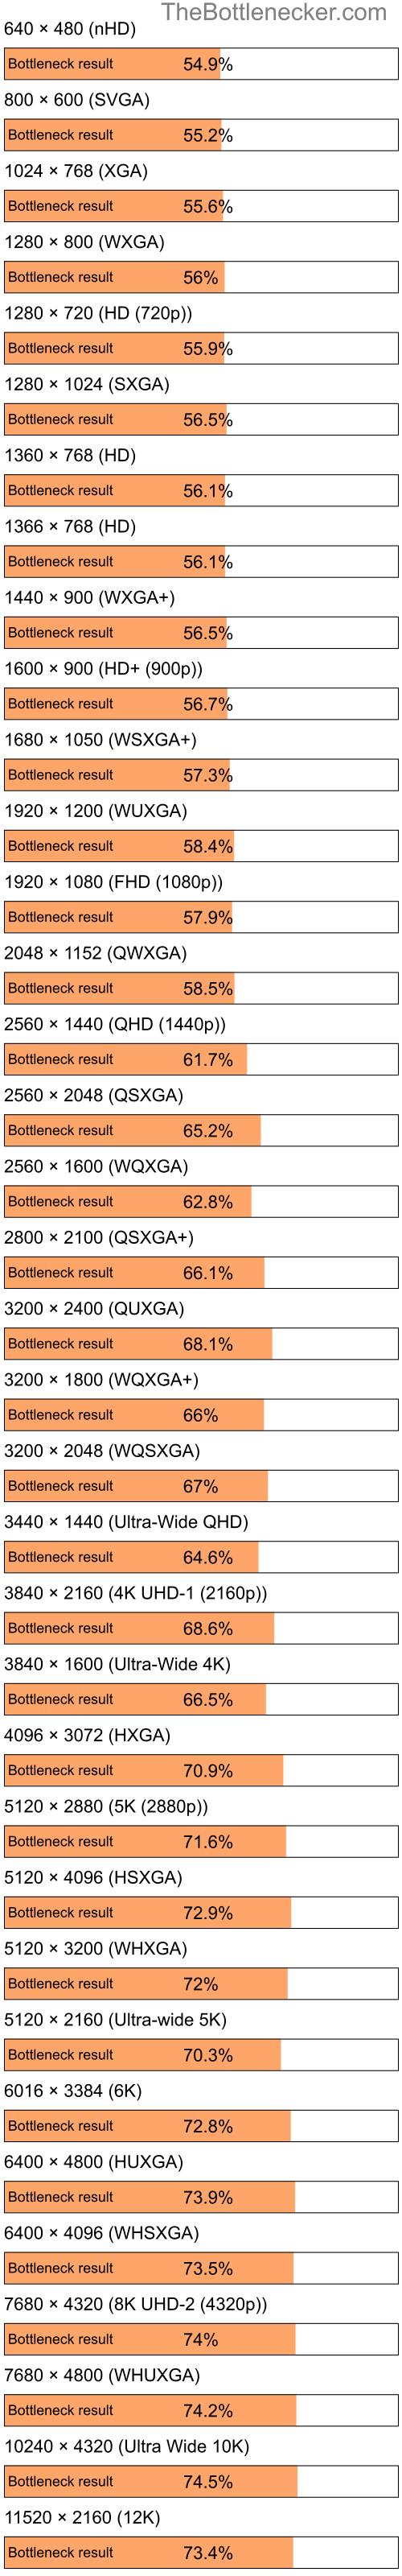 Bottleneck results by resolution for Intel Pentium 4 and AMD Mobility Radeon X1600 in Processor Intense Tasks